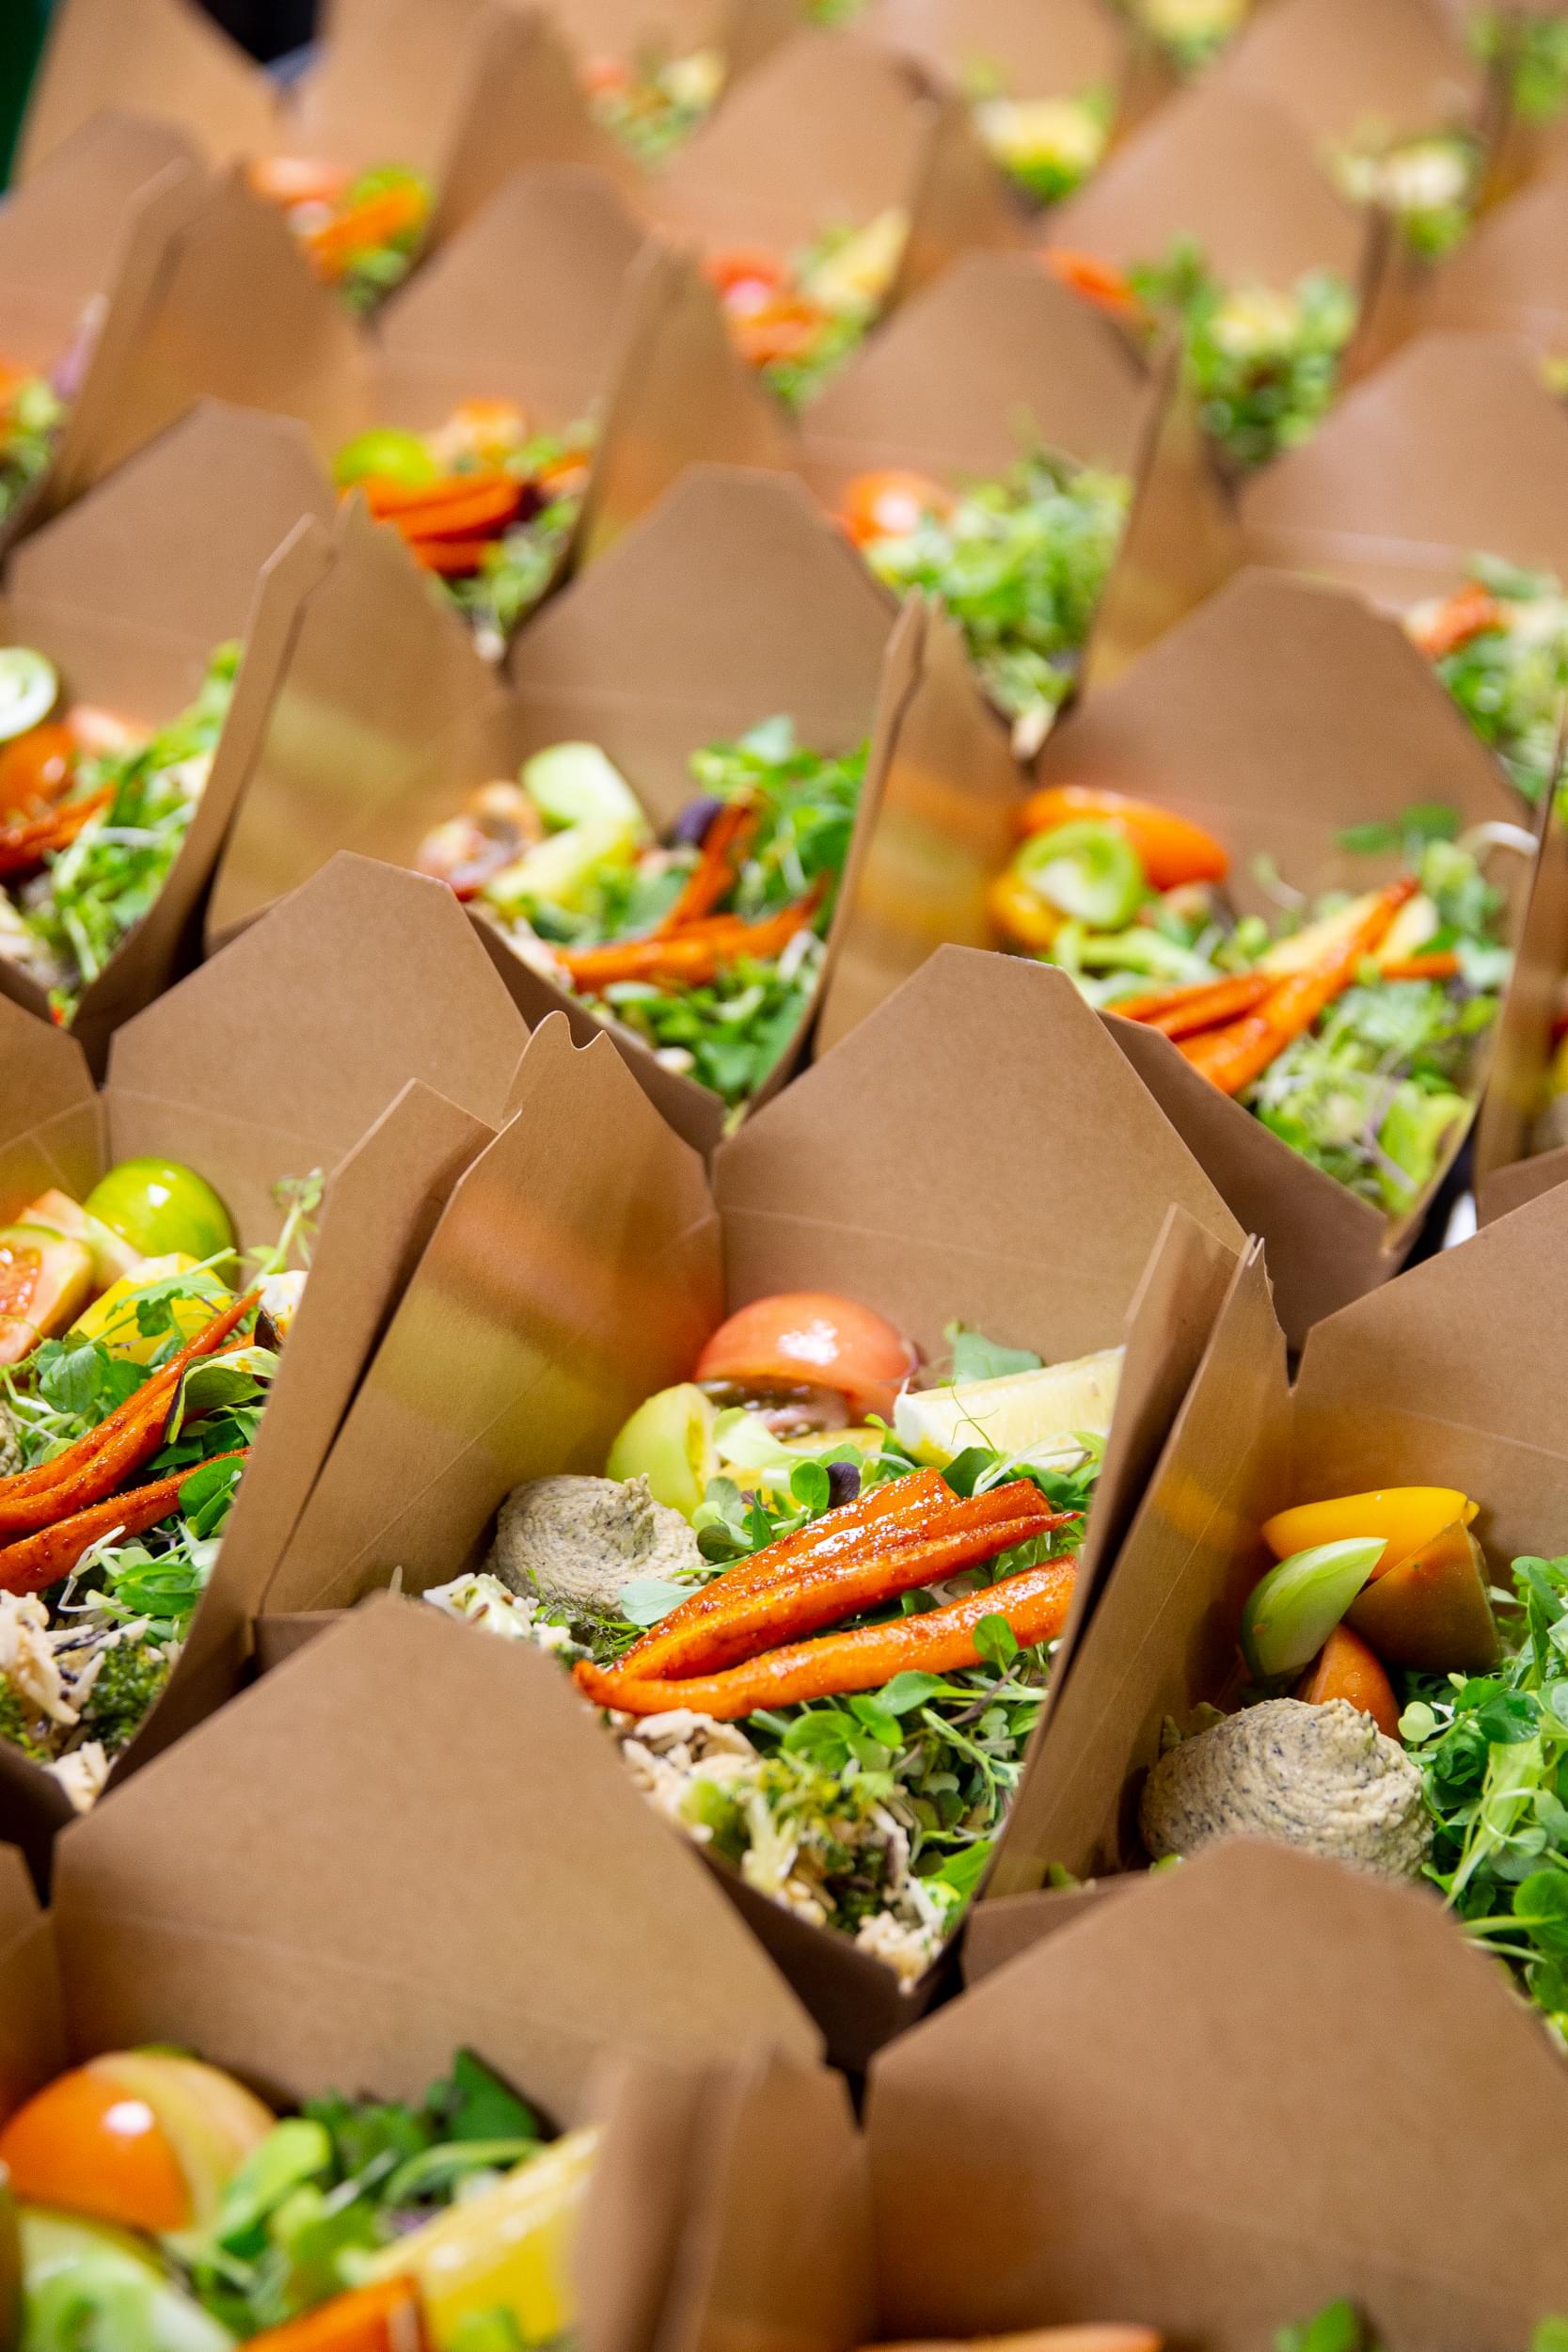 A number of cardboard takeaway containers with a delicious, colourful medley of vegetables and rice inside